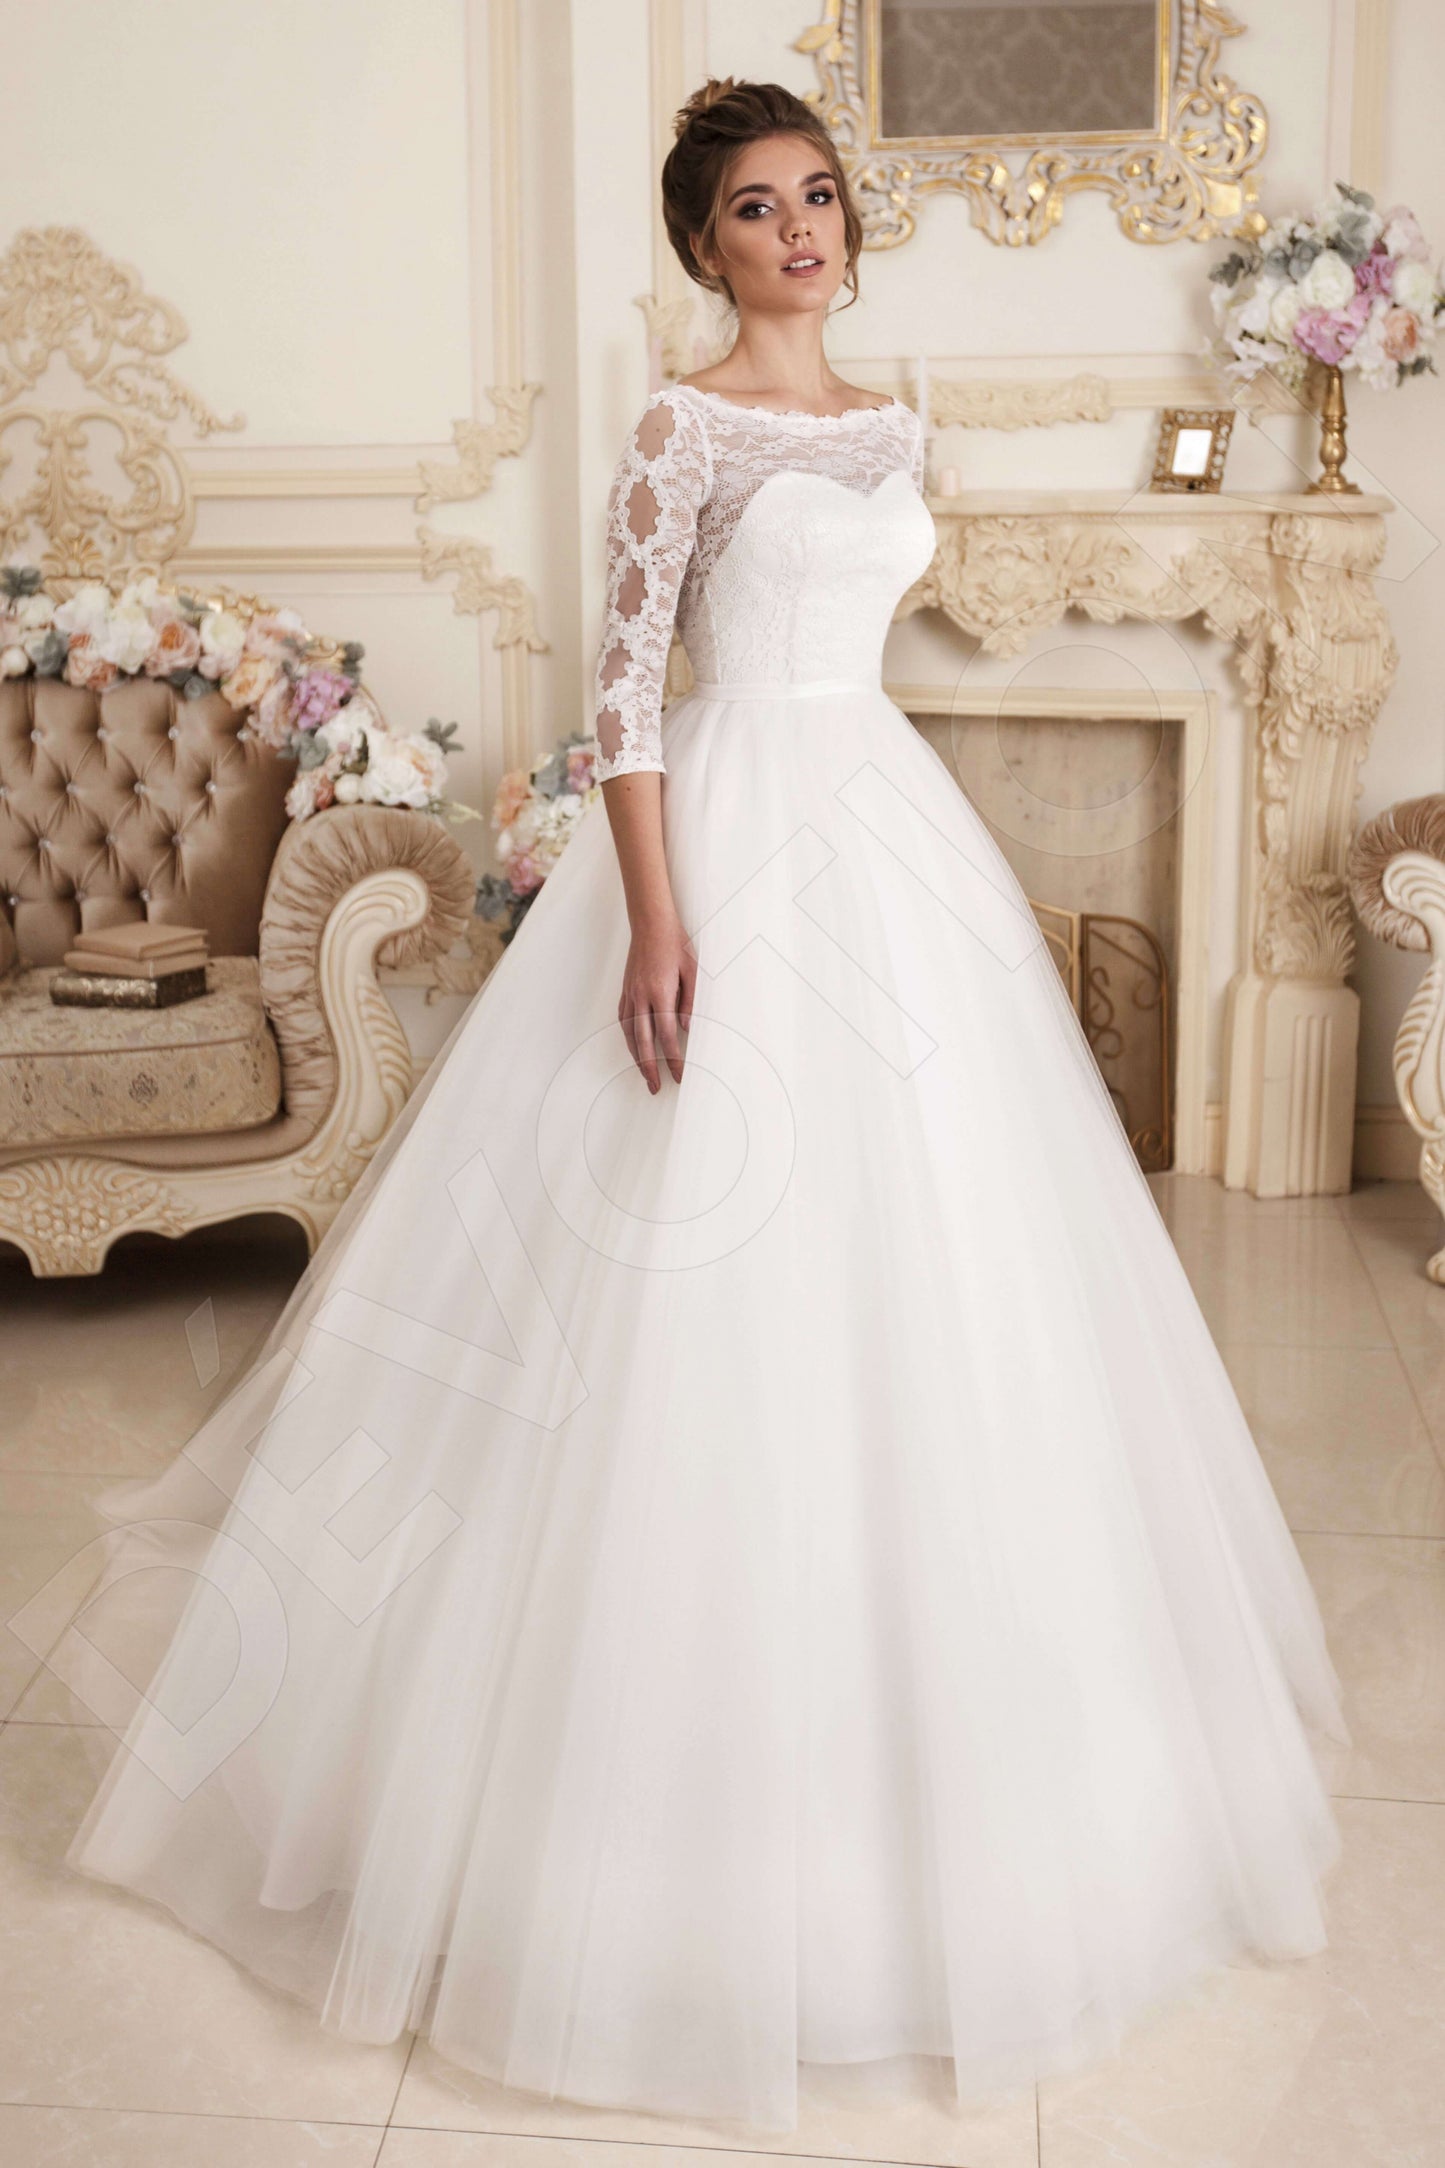 Trissy Open back Princess/Ball Gown 3/4 sleeve Wedding Dress Front